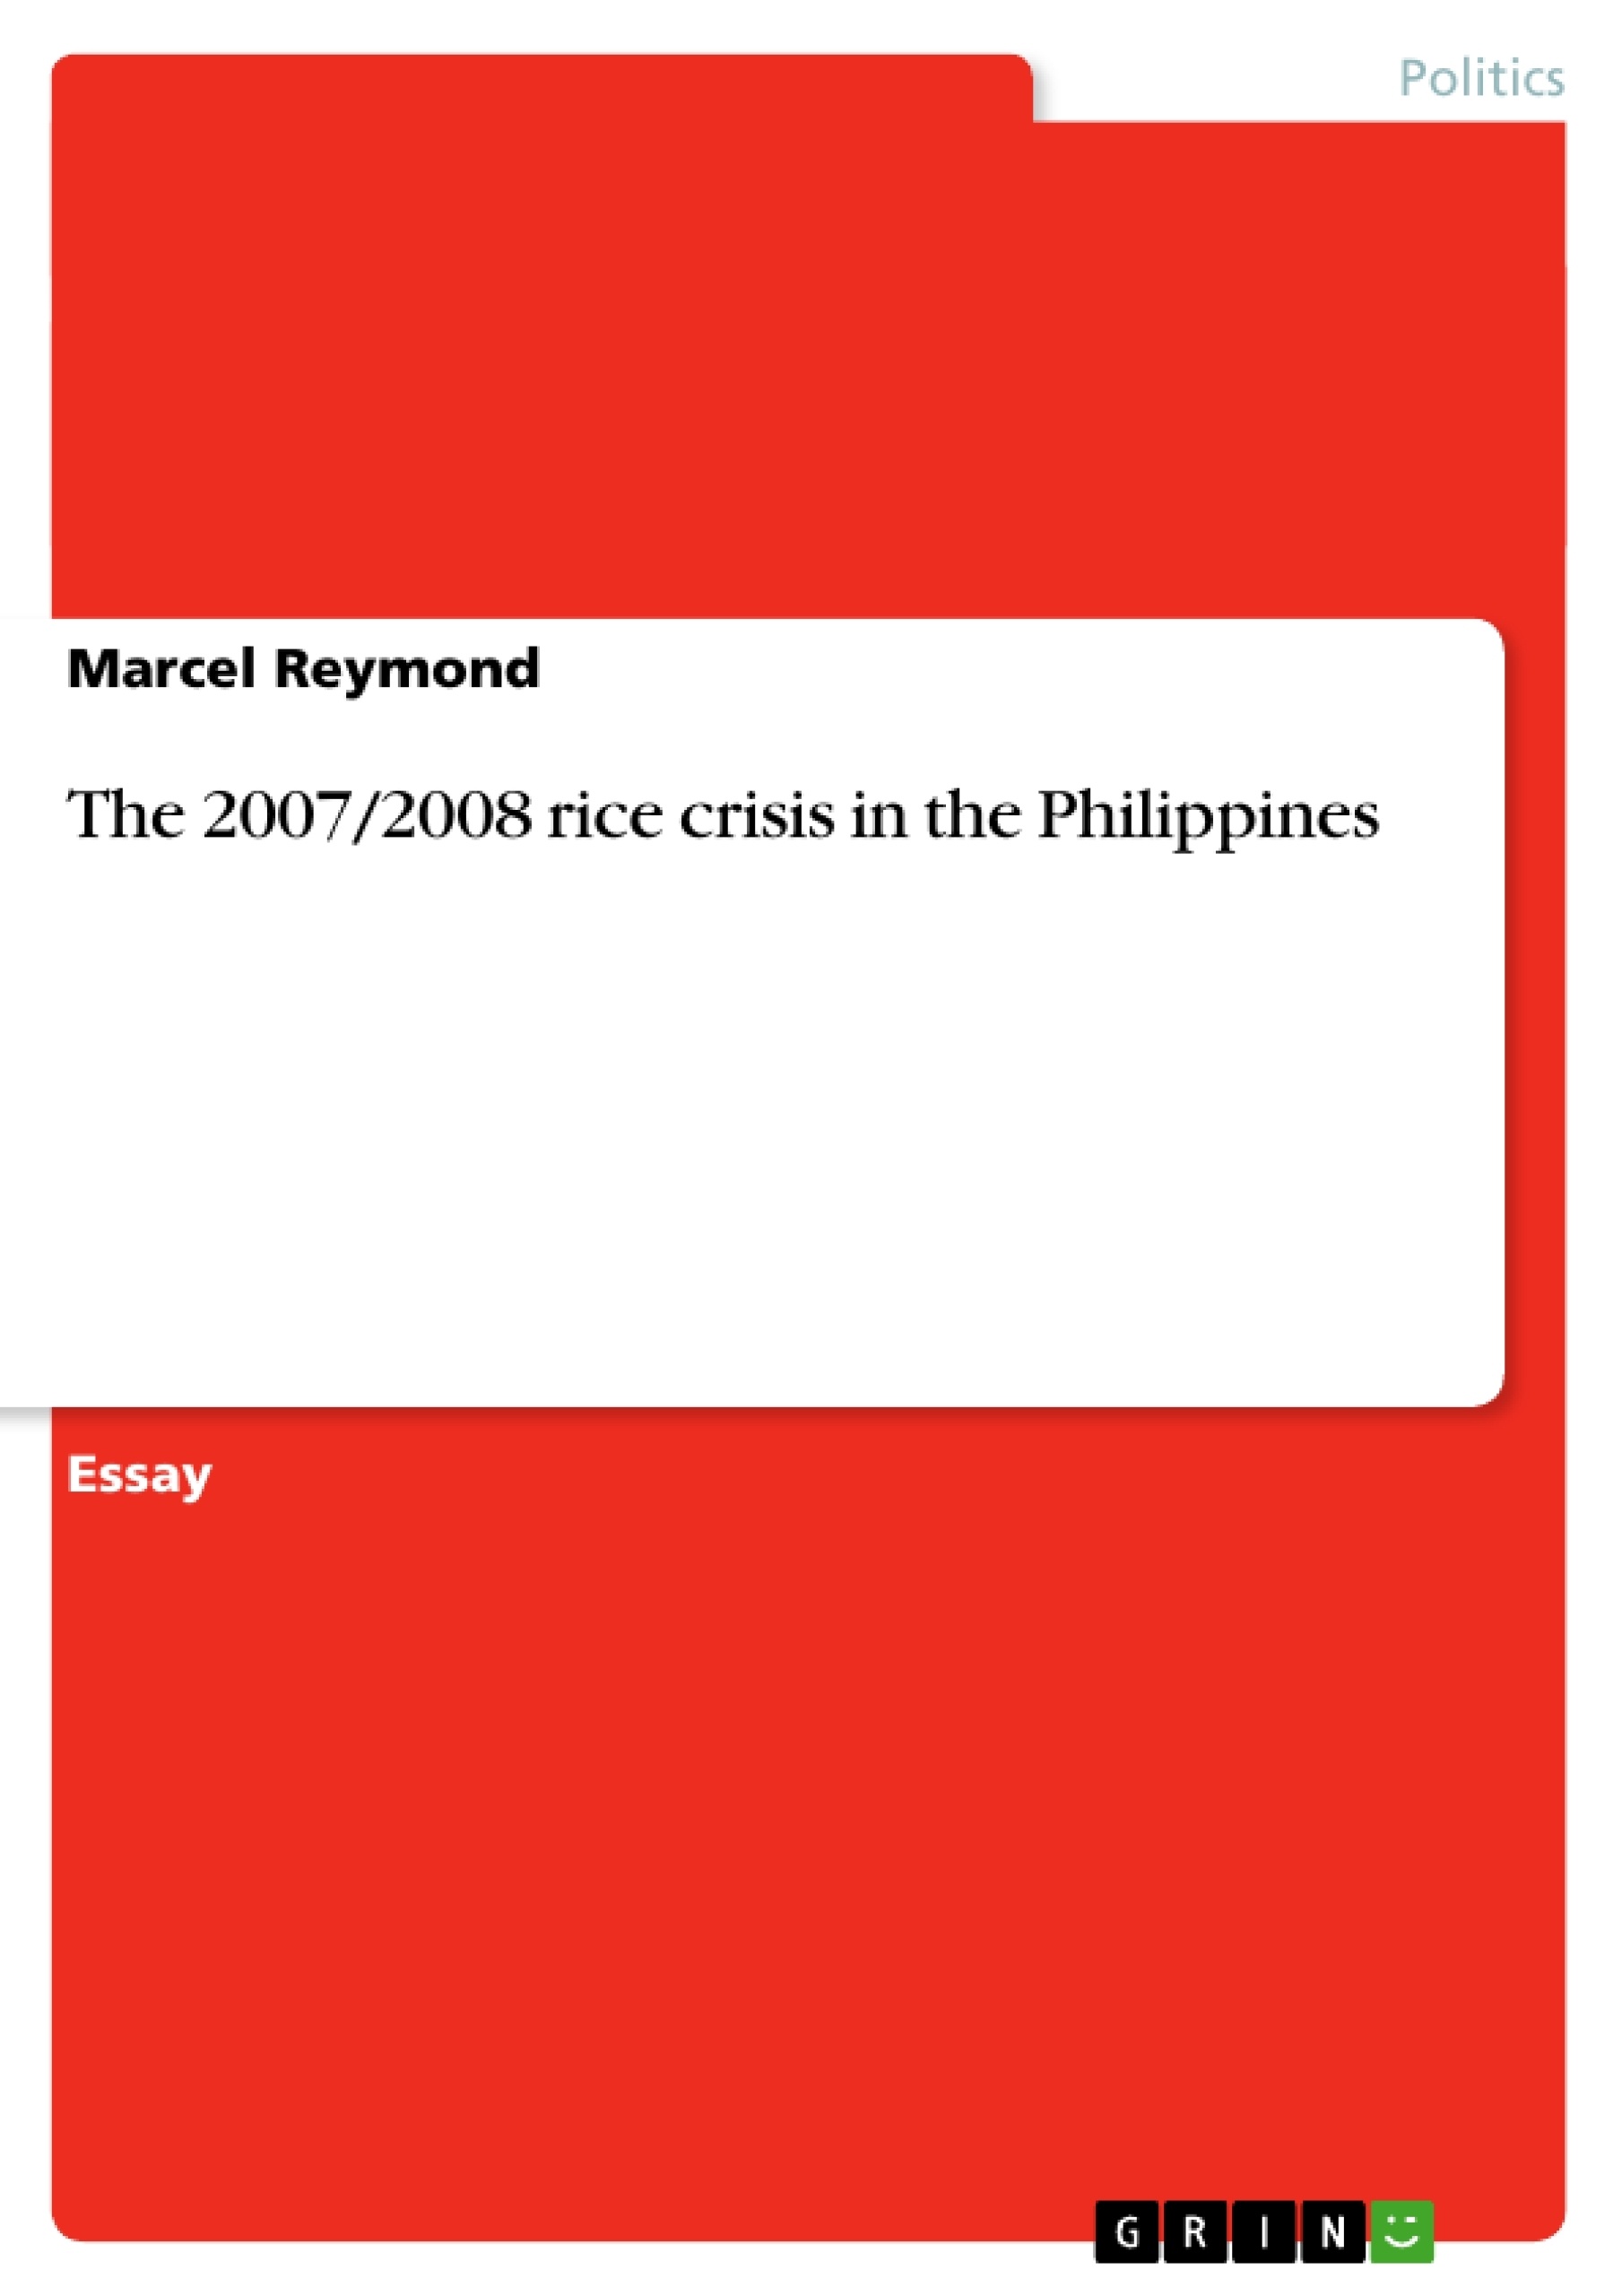 Title: The 2007/2008 rice crisis in the Philippines